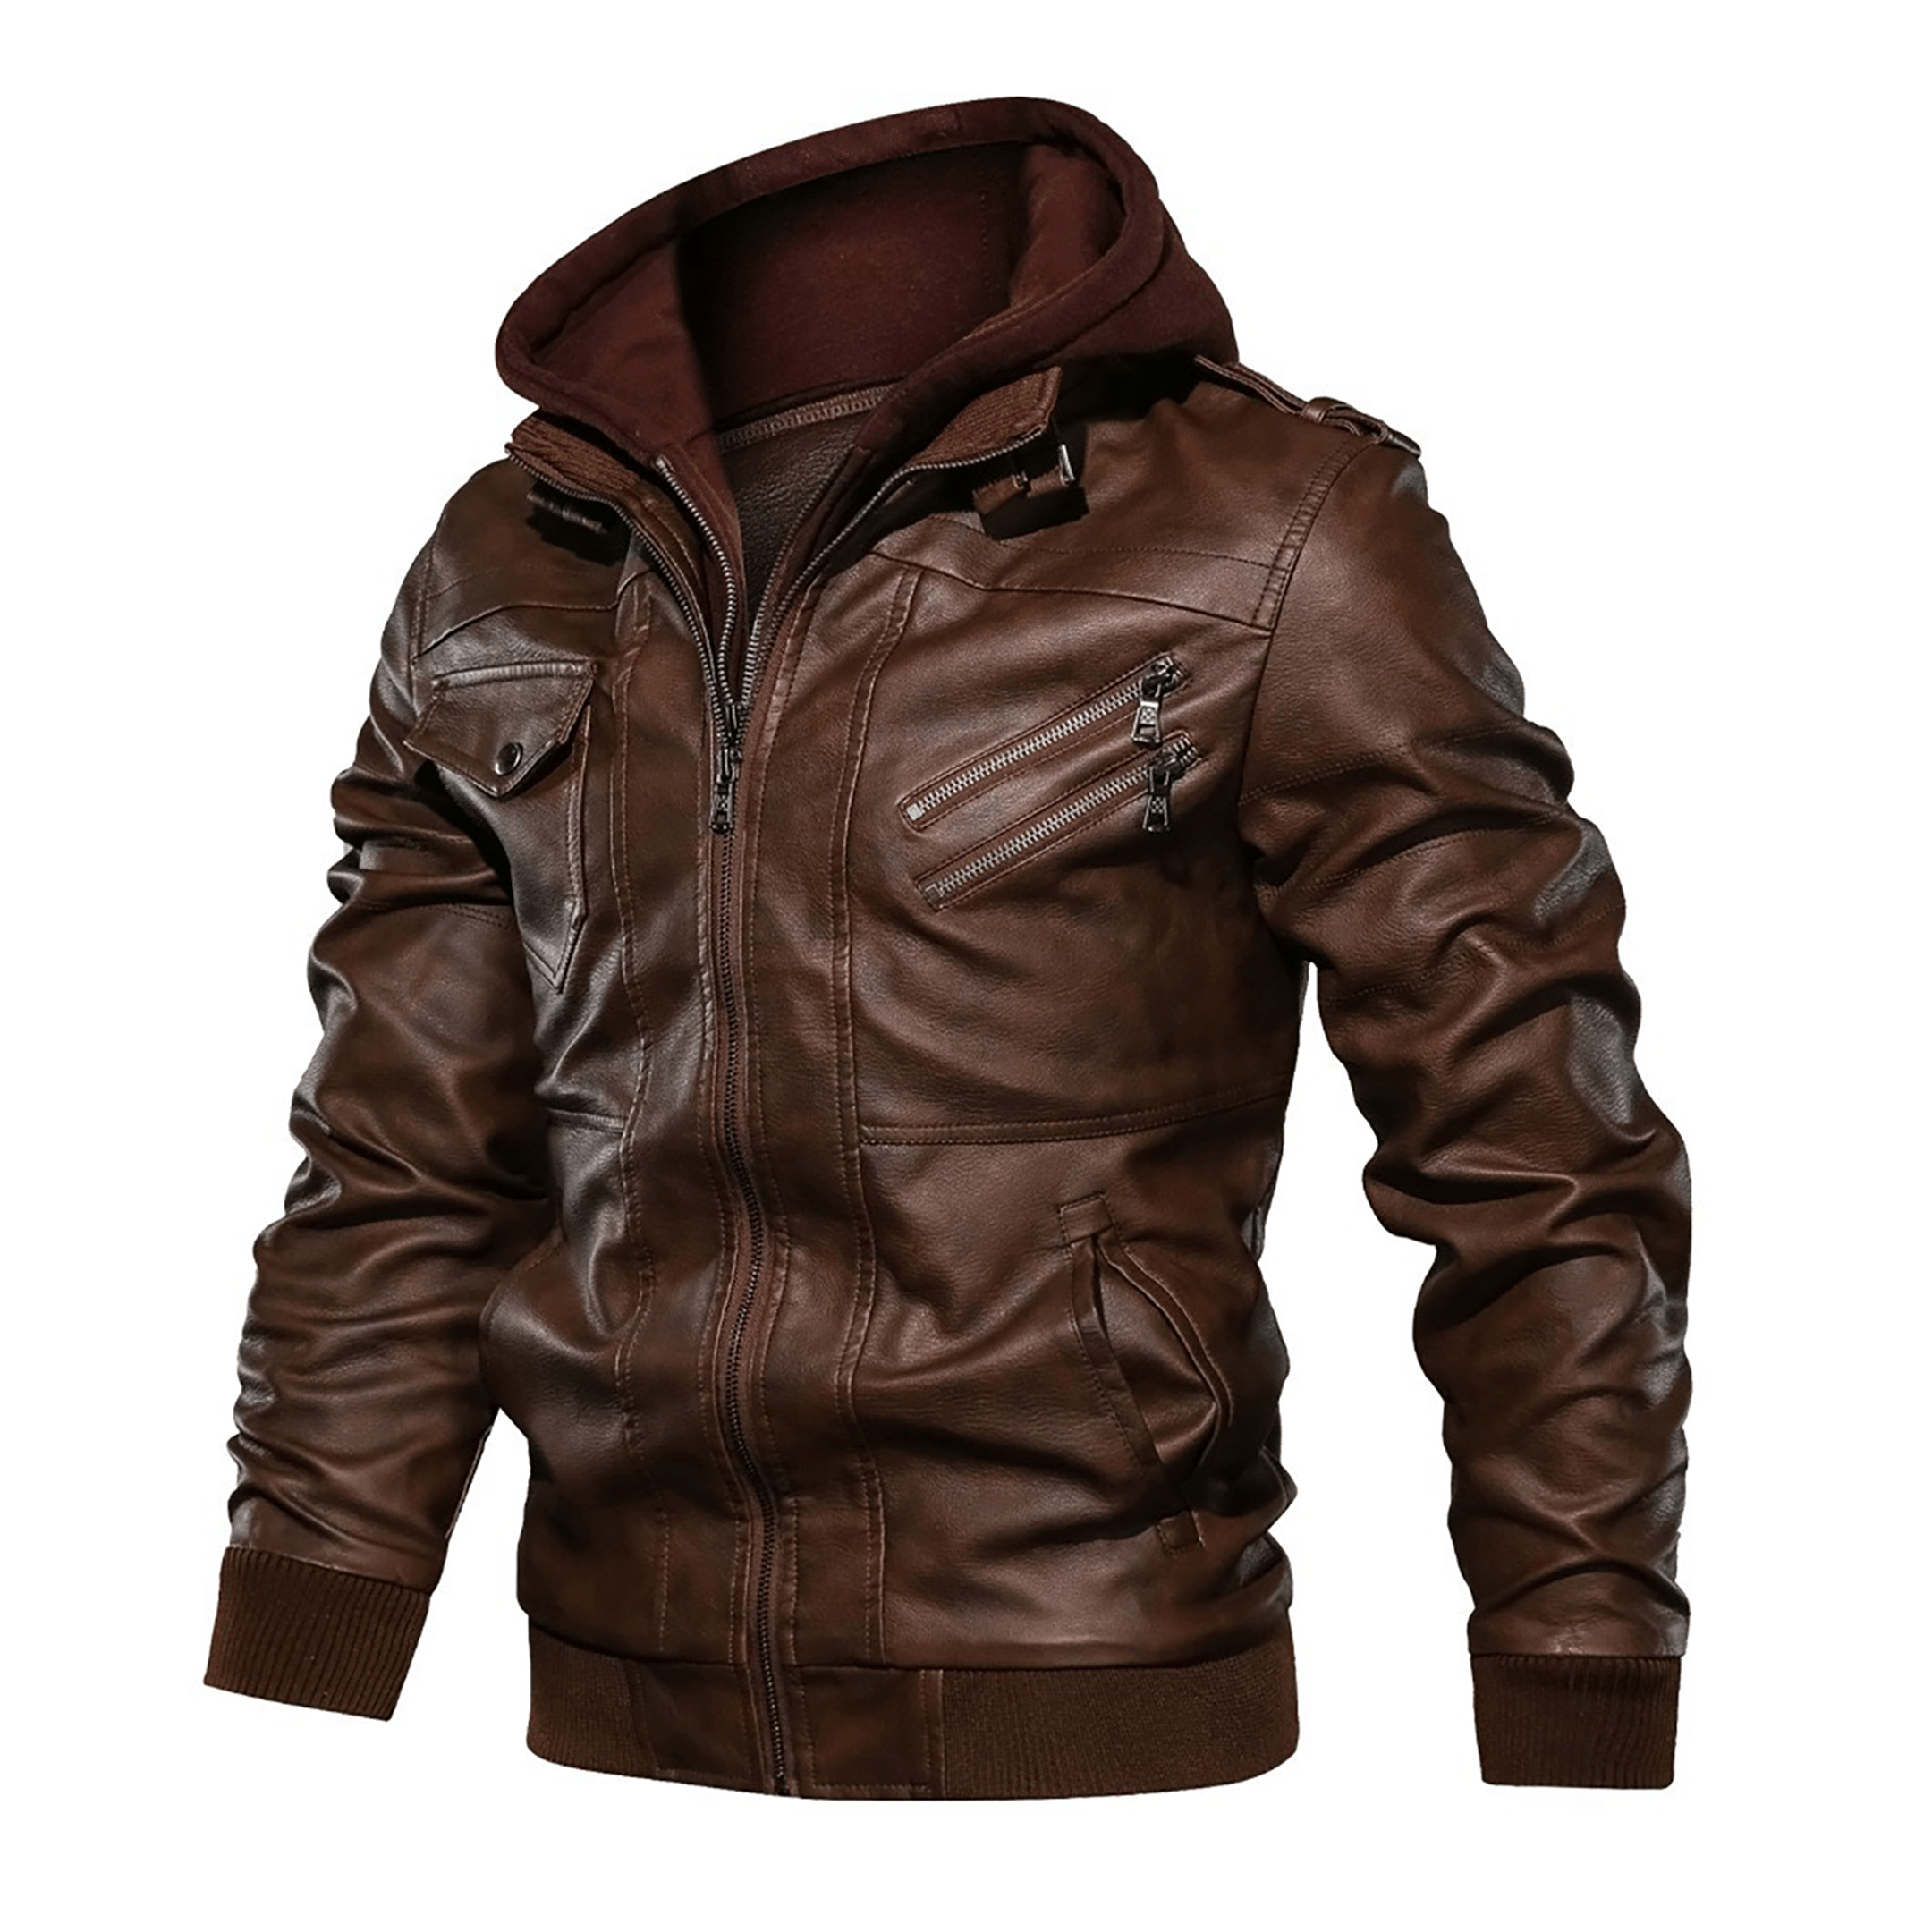 Top leather jackets and latest products 333